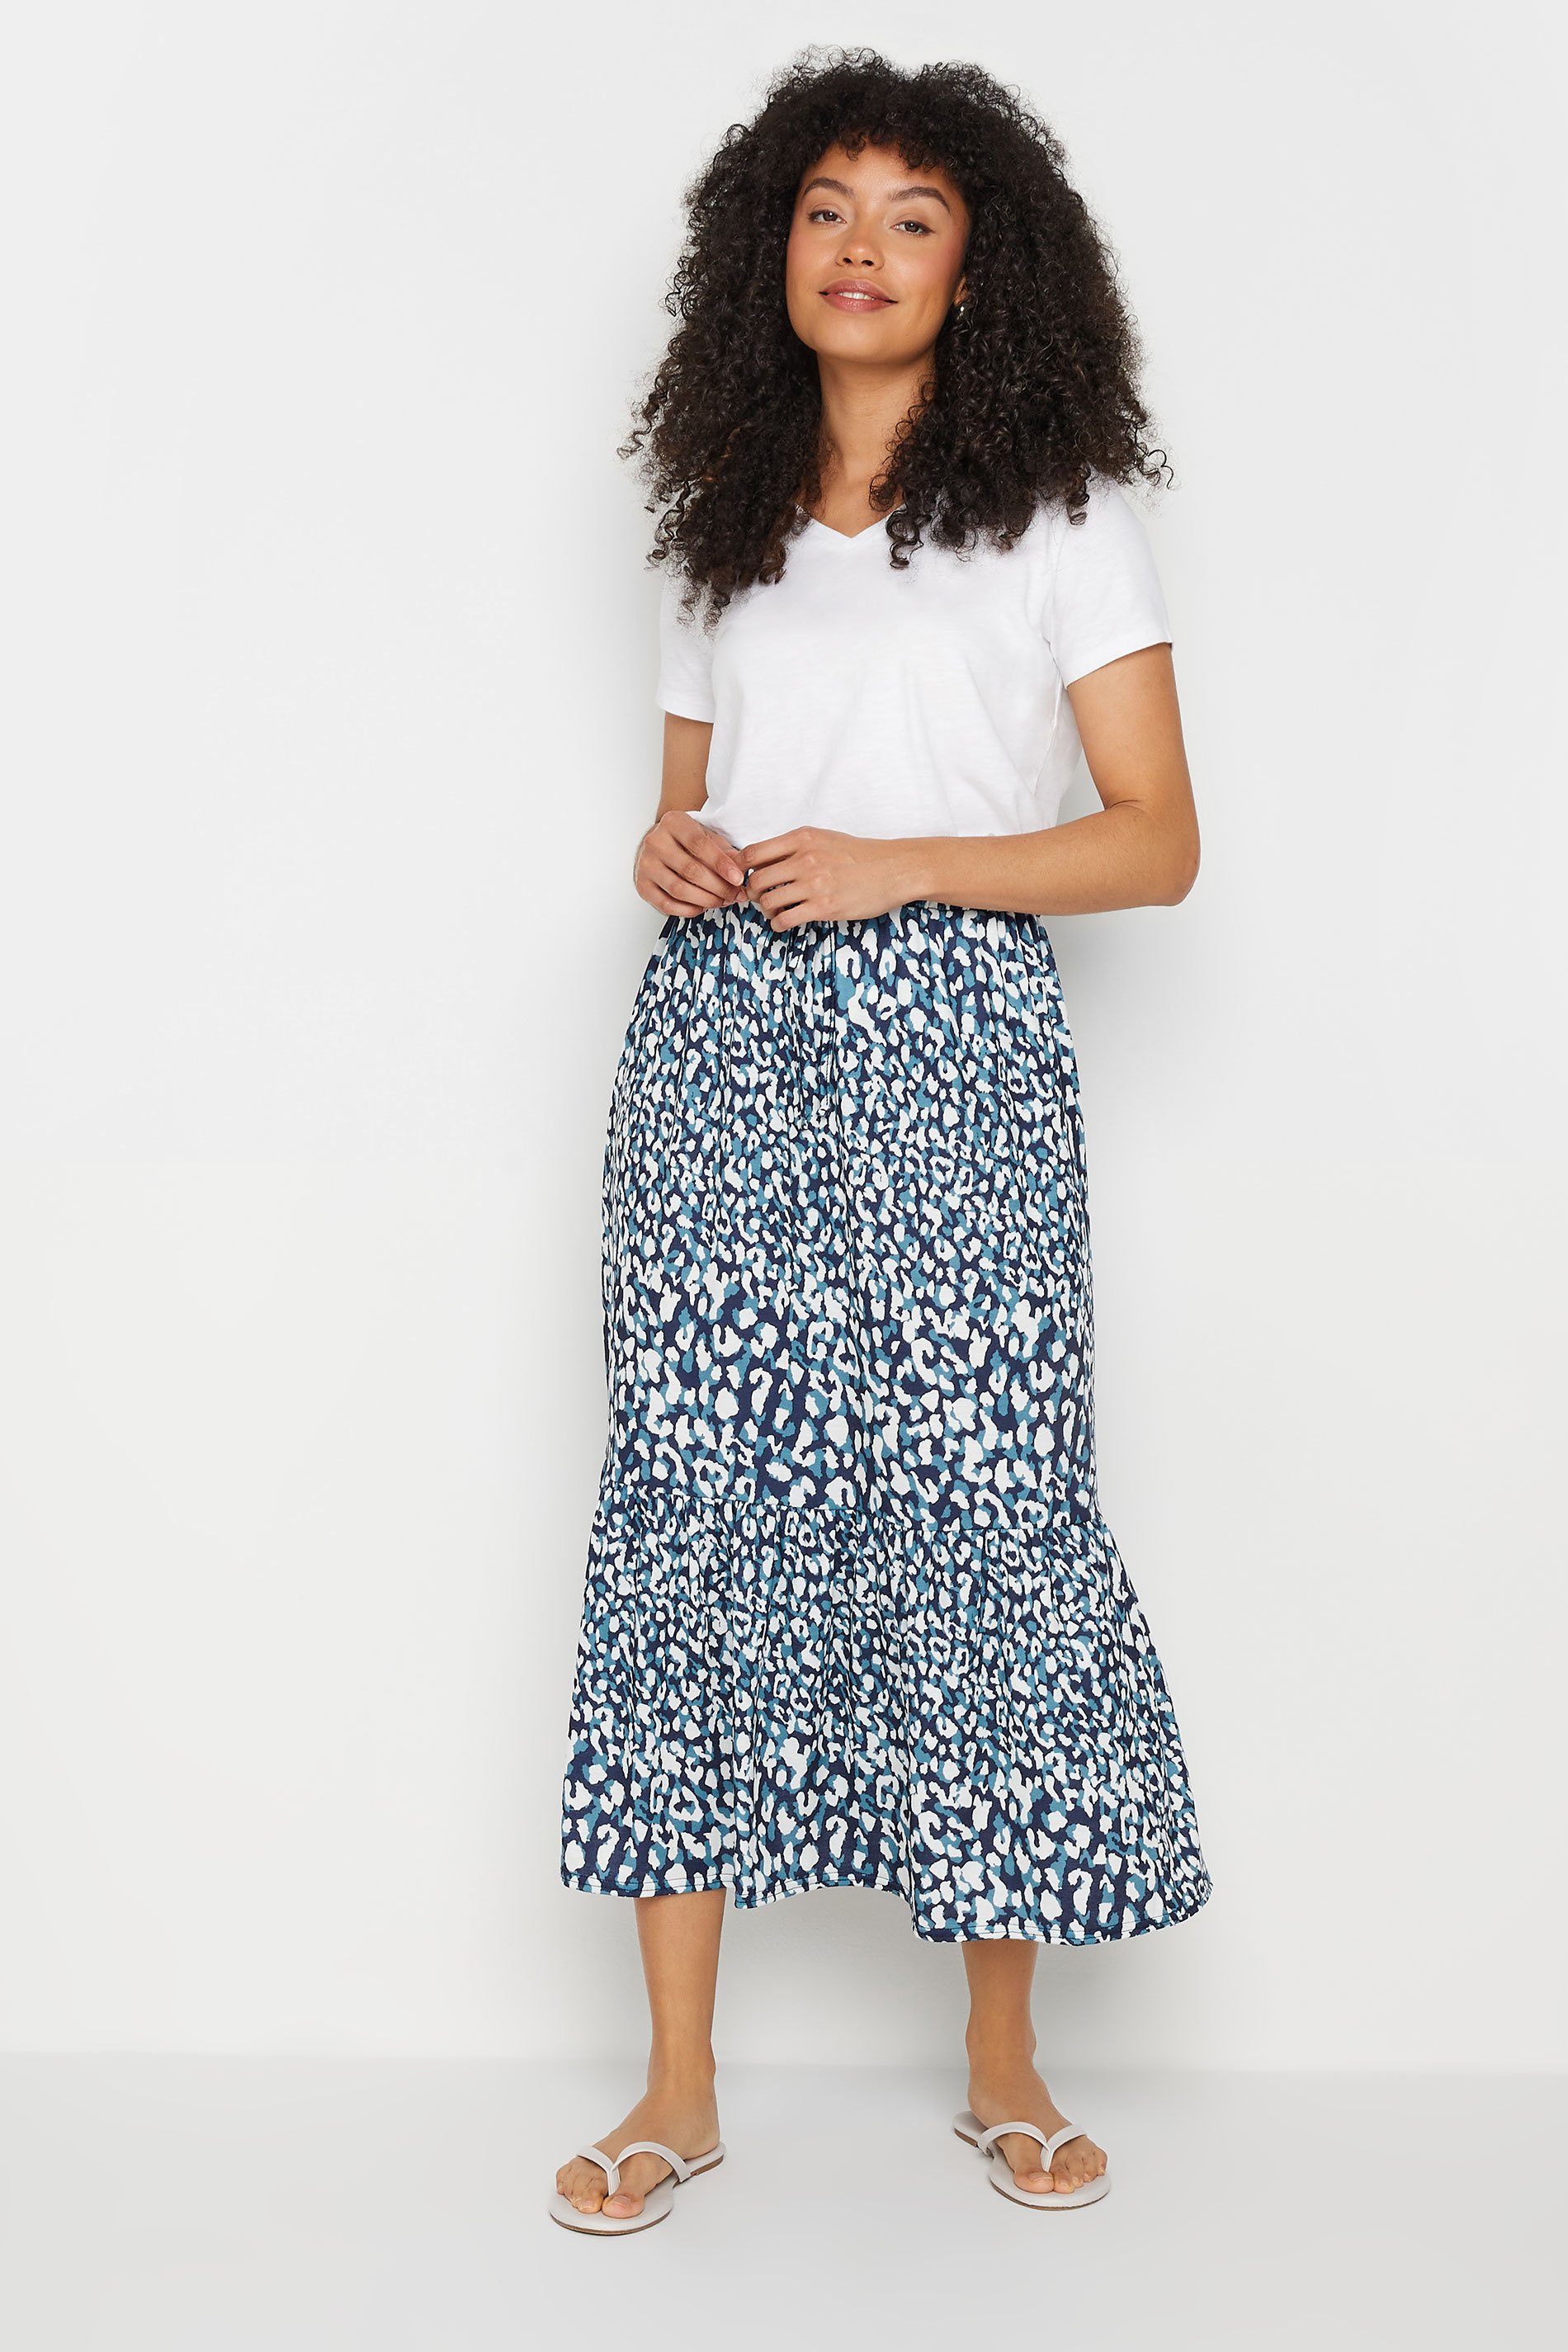 M&Co Blue Leopard Print Tiered Skirt | M&Co 2